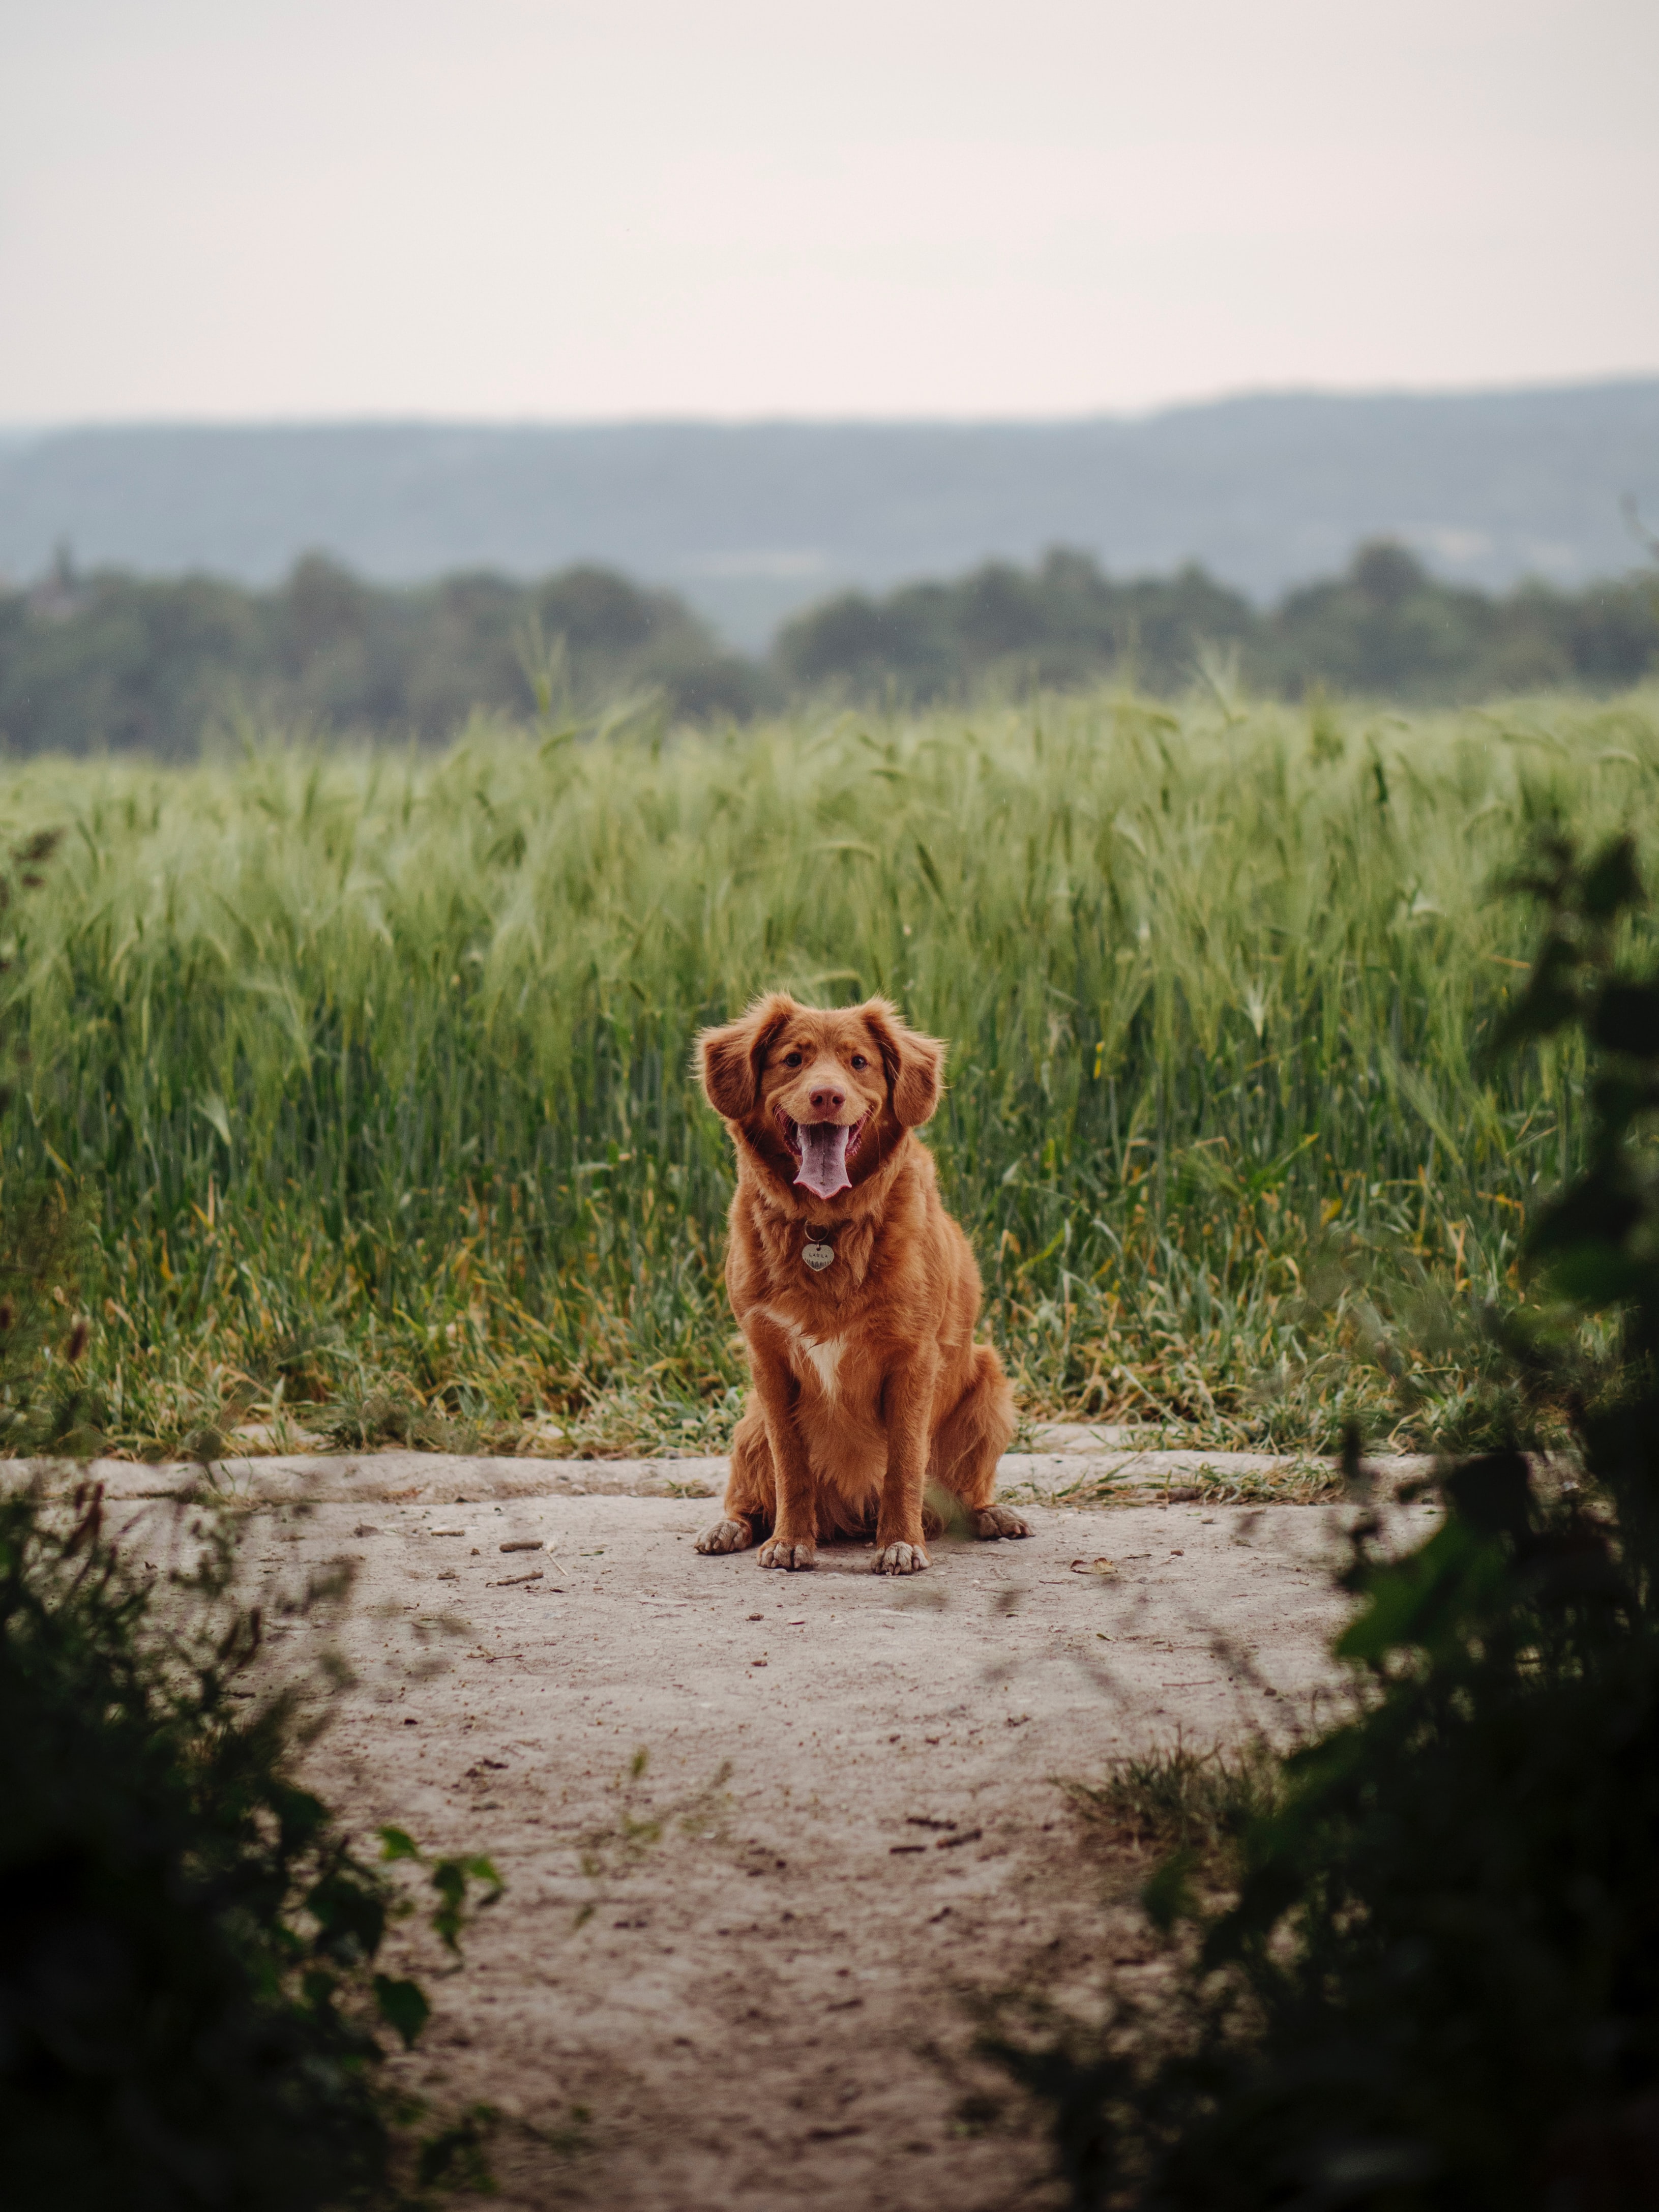 animals, grass, dog, protruding tongue, tongue stuck out, retriever Full HD